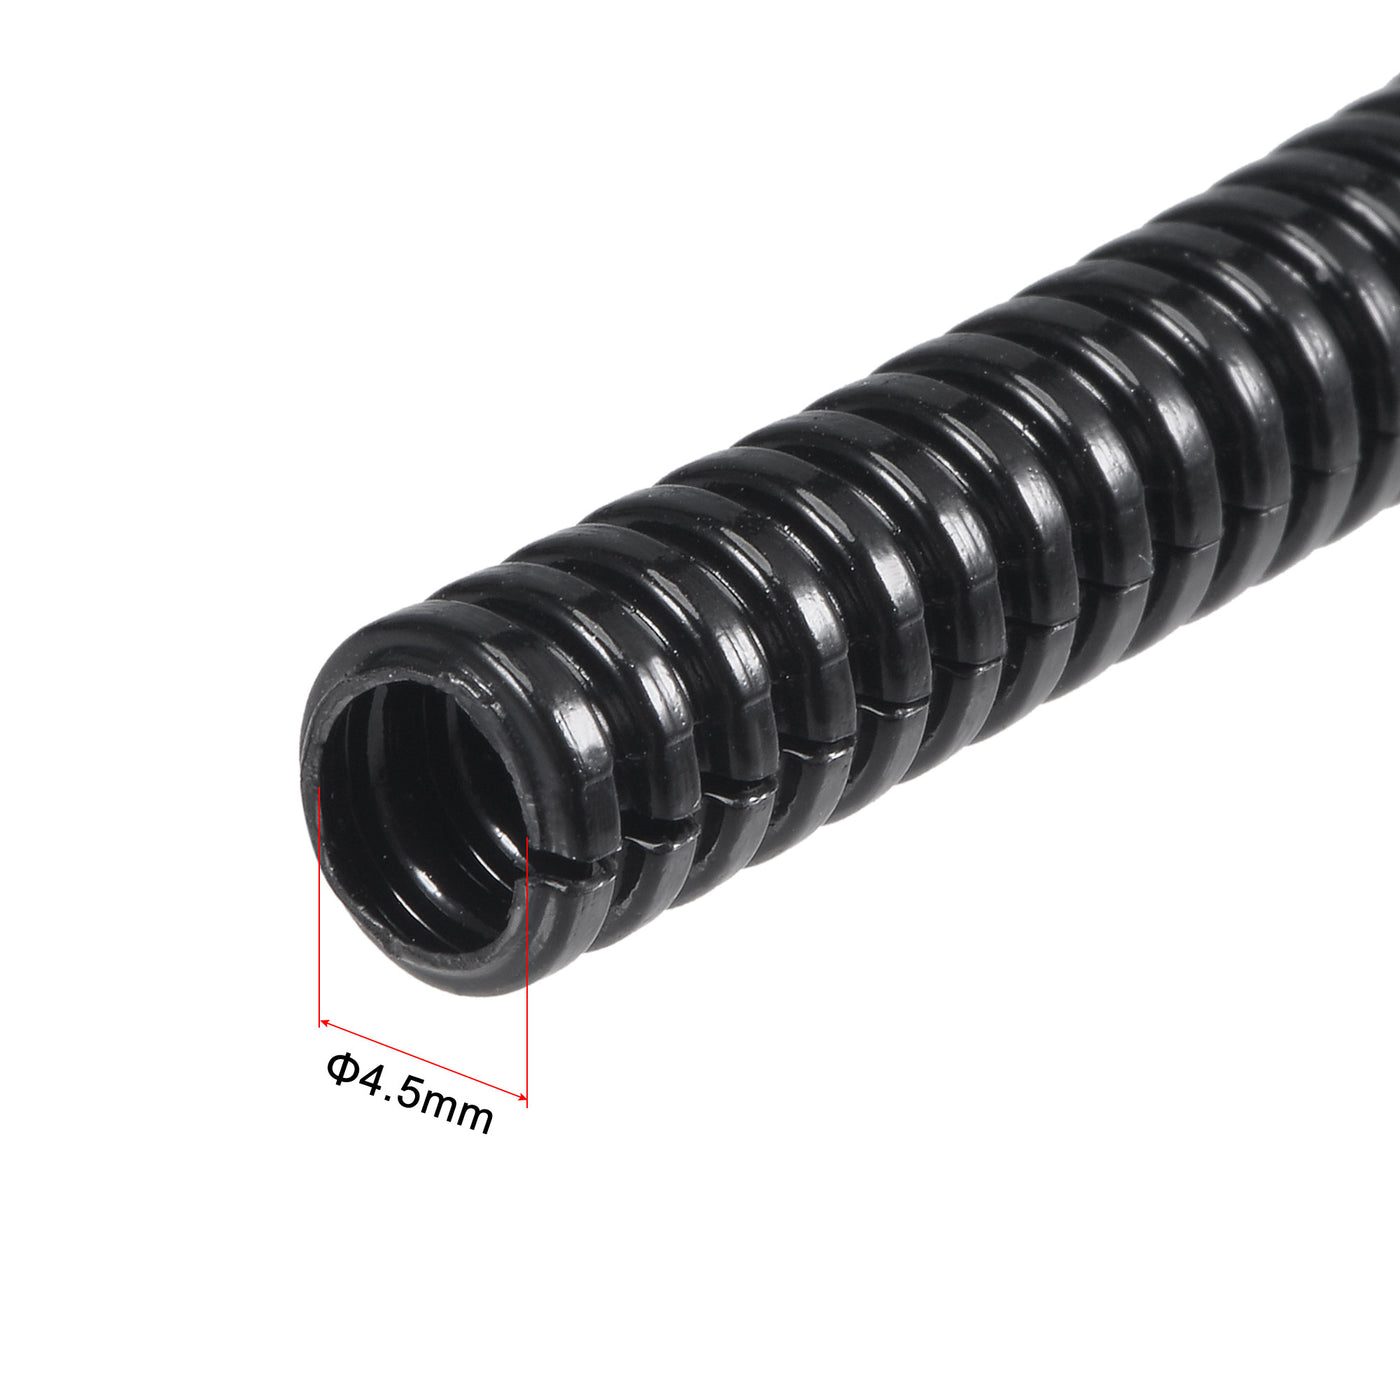 uxcell Uxcell 5 M 4.5 x 7 mm PA Split Corrugated Conduit Tube for Garden,Office Black